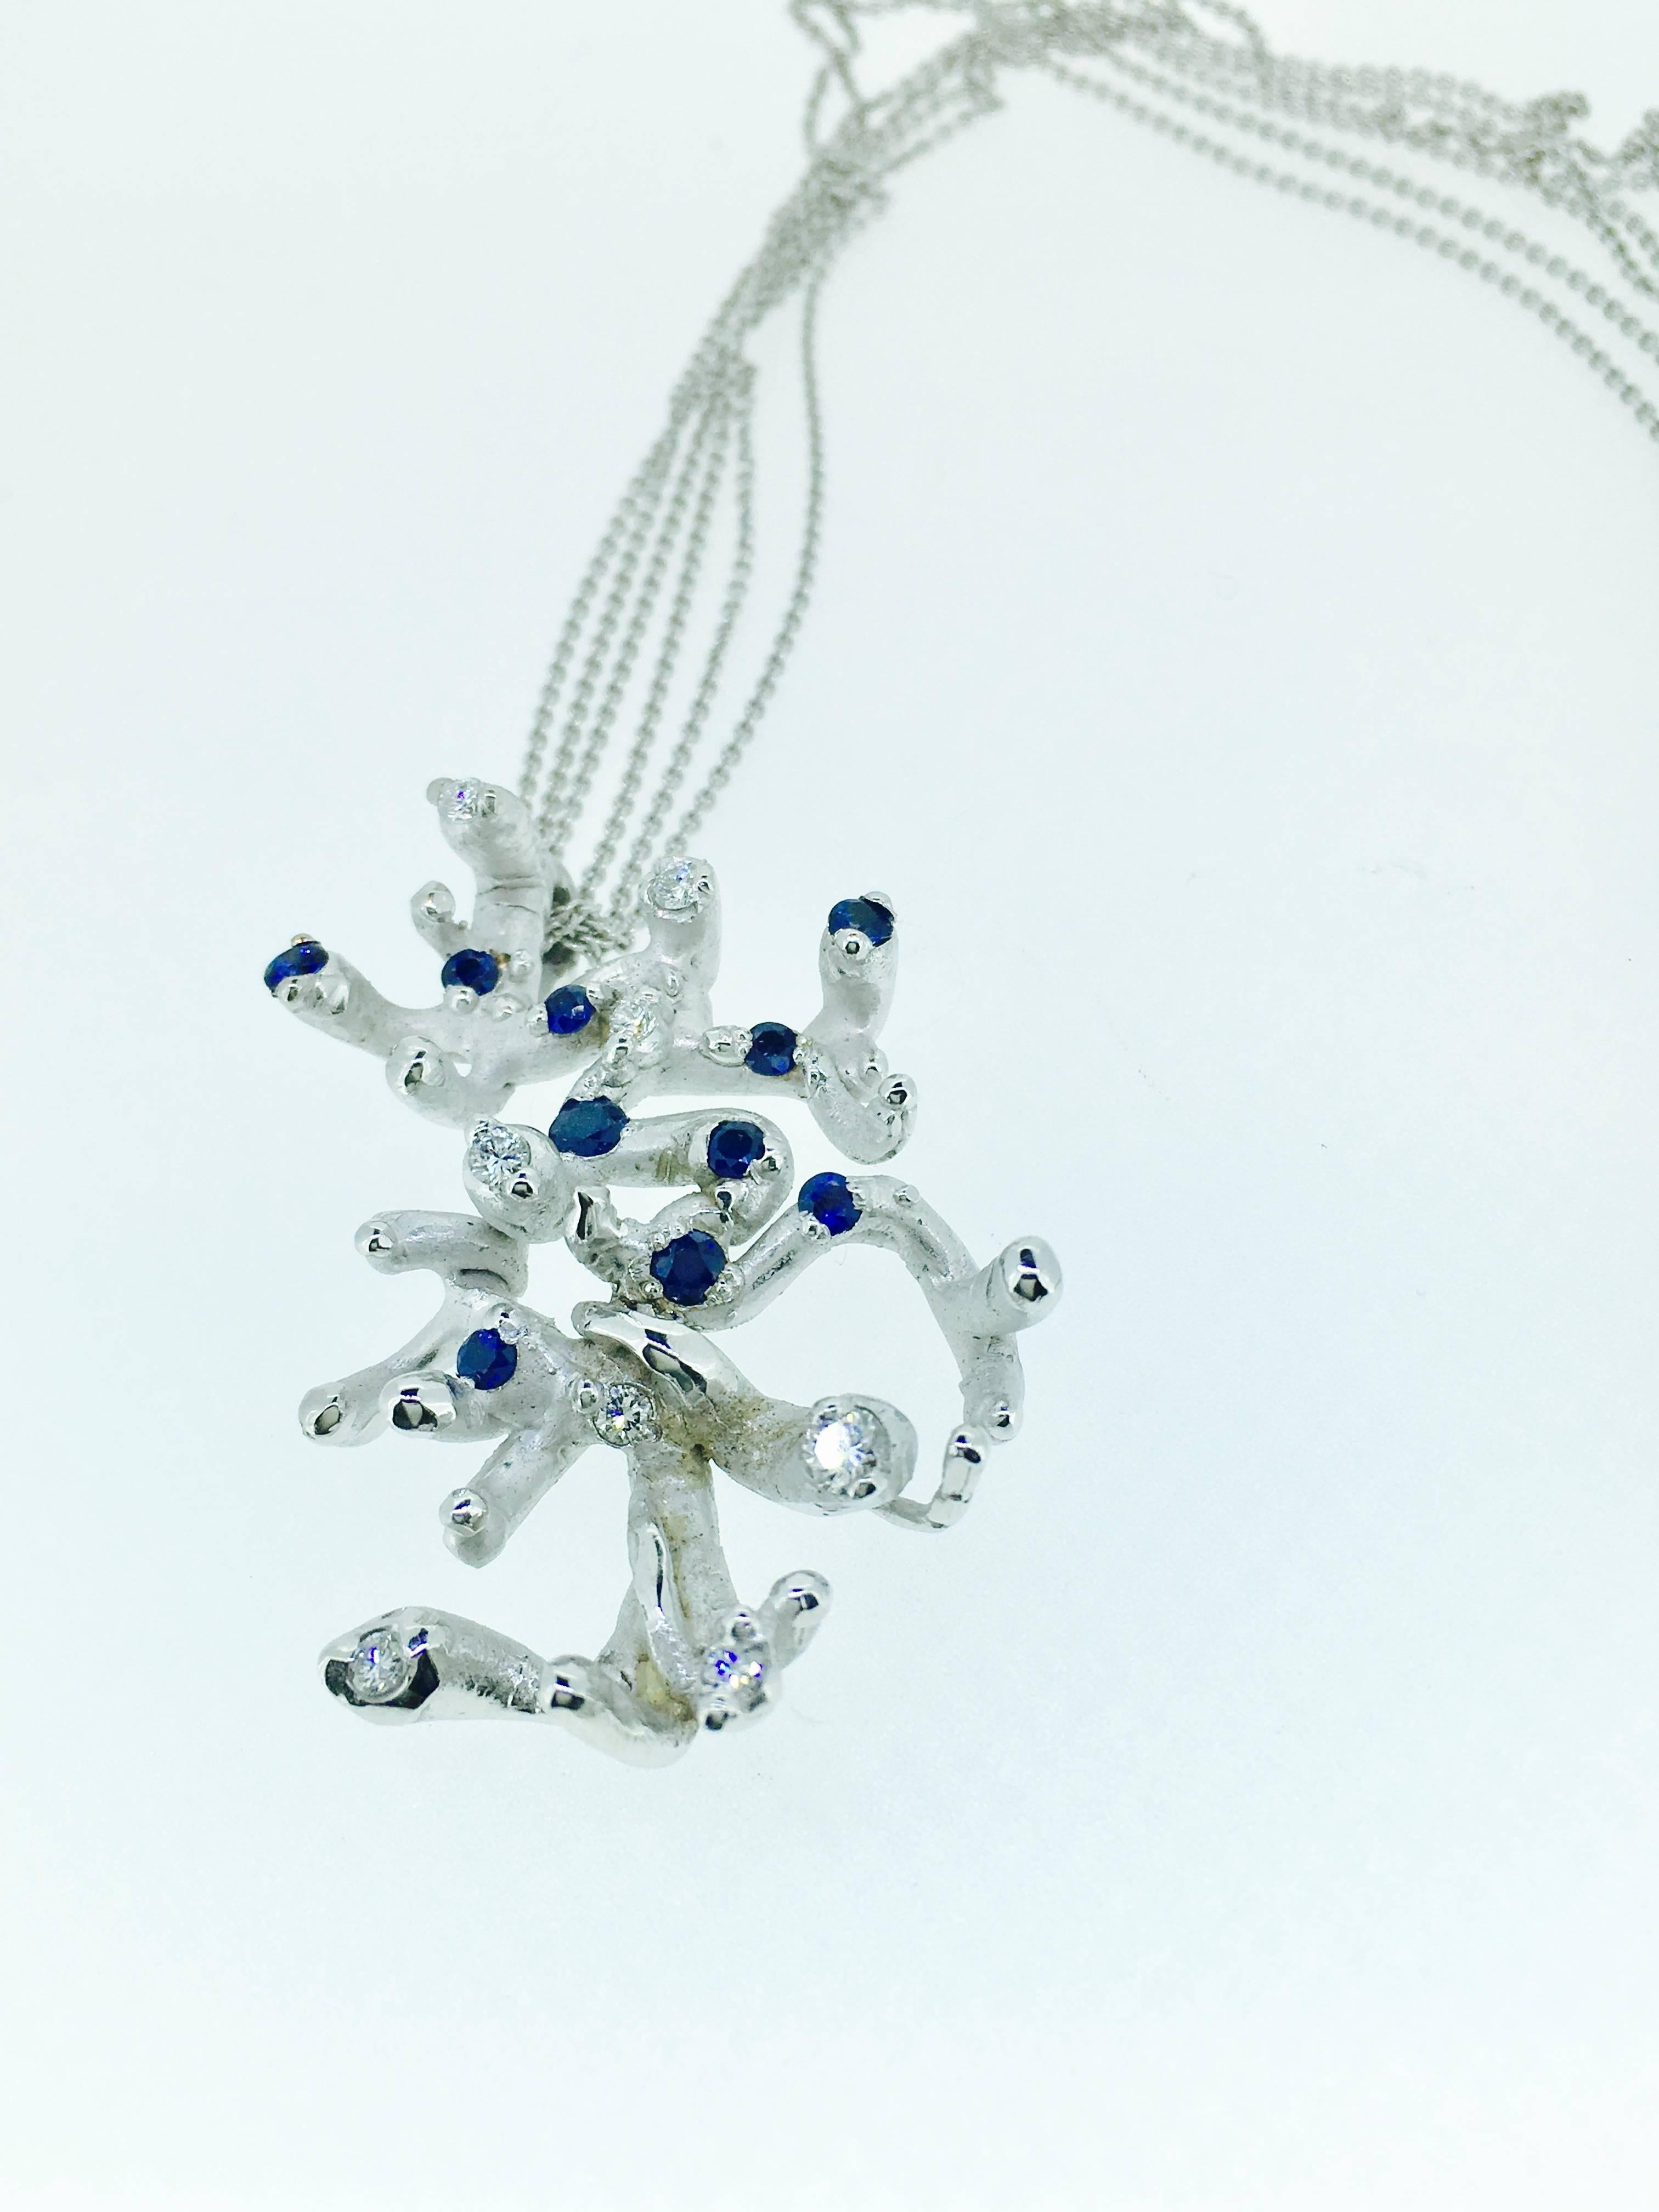 This one of a kind Necklace is a mini Sculpture-like Modernist piece signed SVG.
It consist of 8 Brilliants  of 0.15 Ct.
                   10 Saphires of 0.25 Ct.
It's a total of 11.7 gr White Gold .
